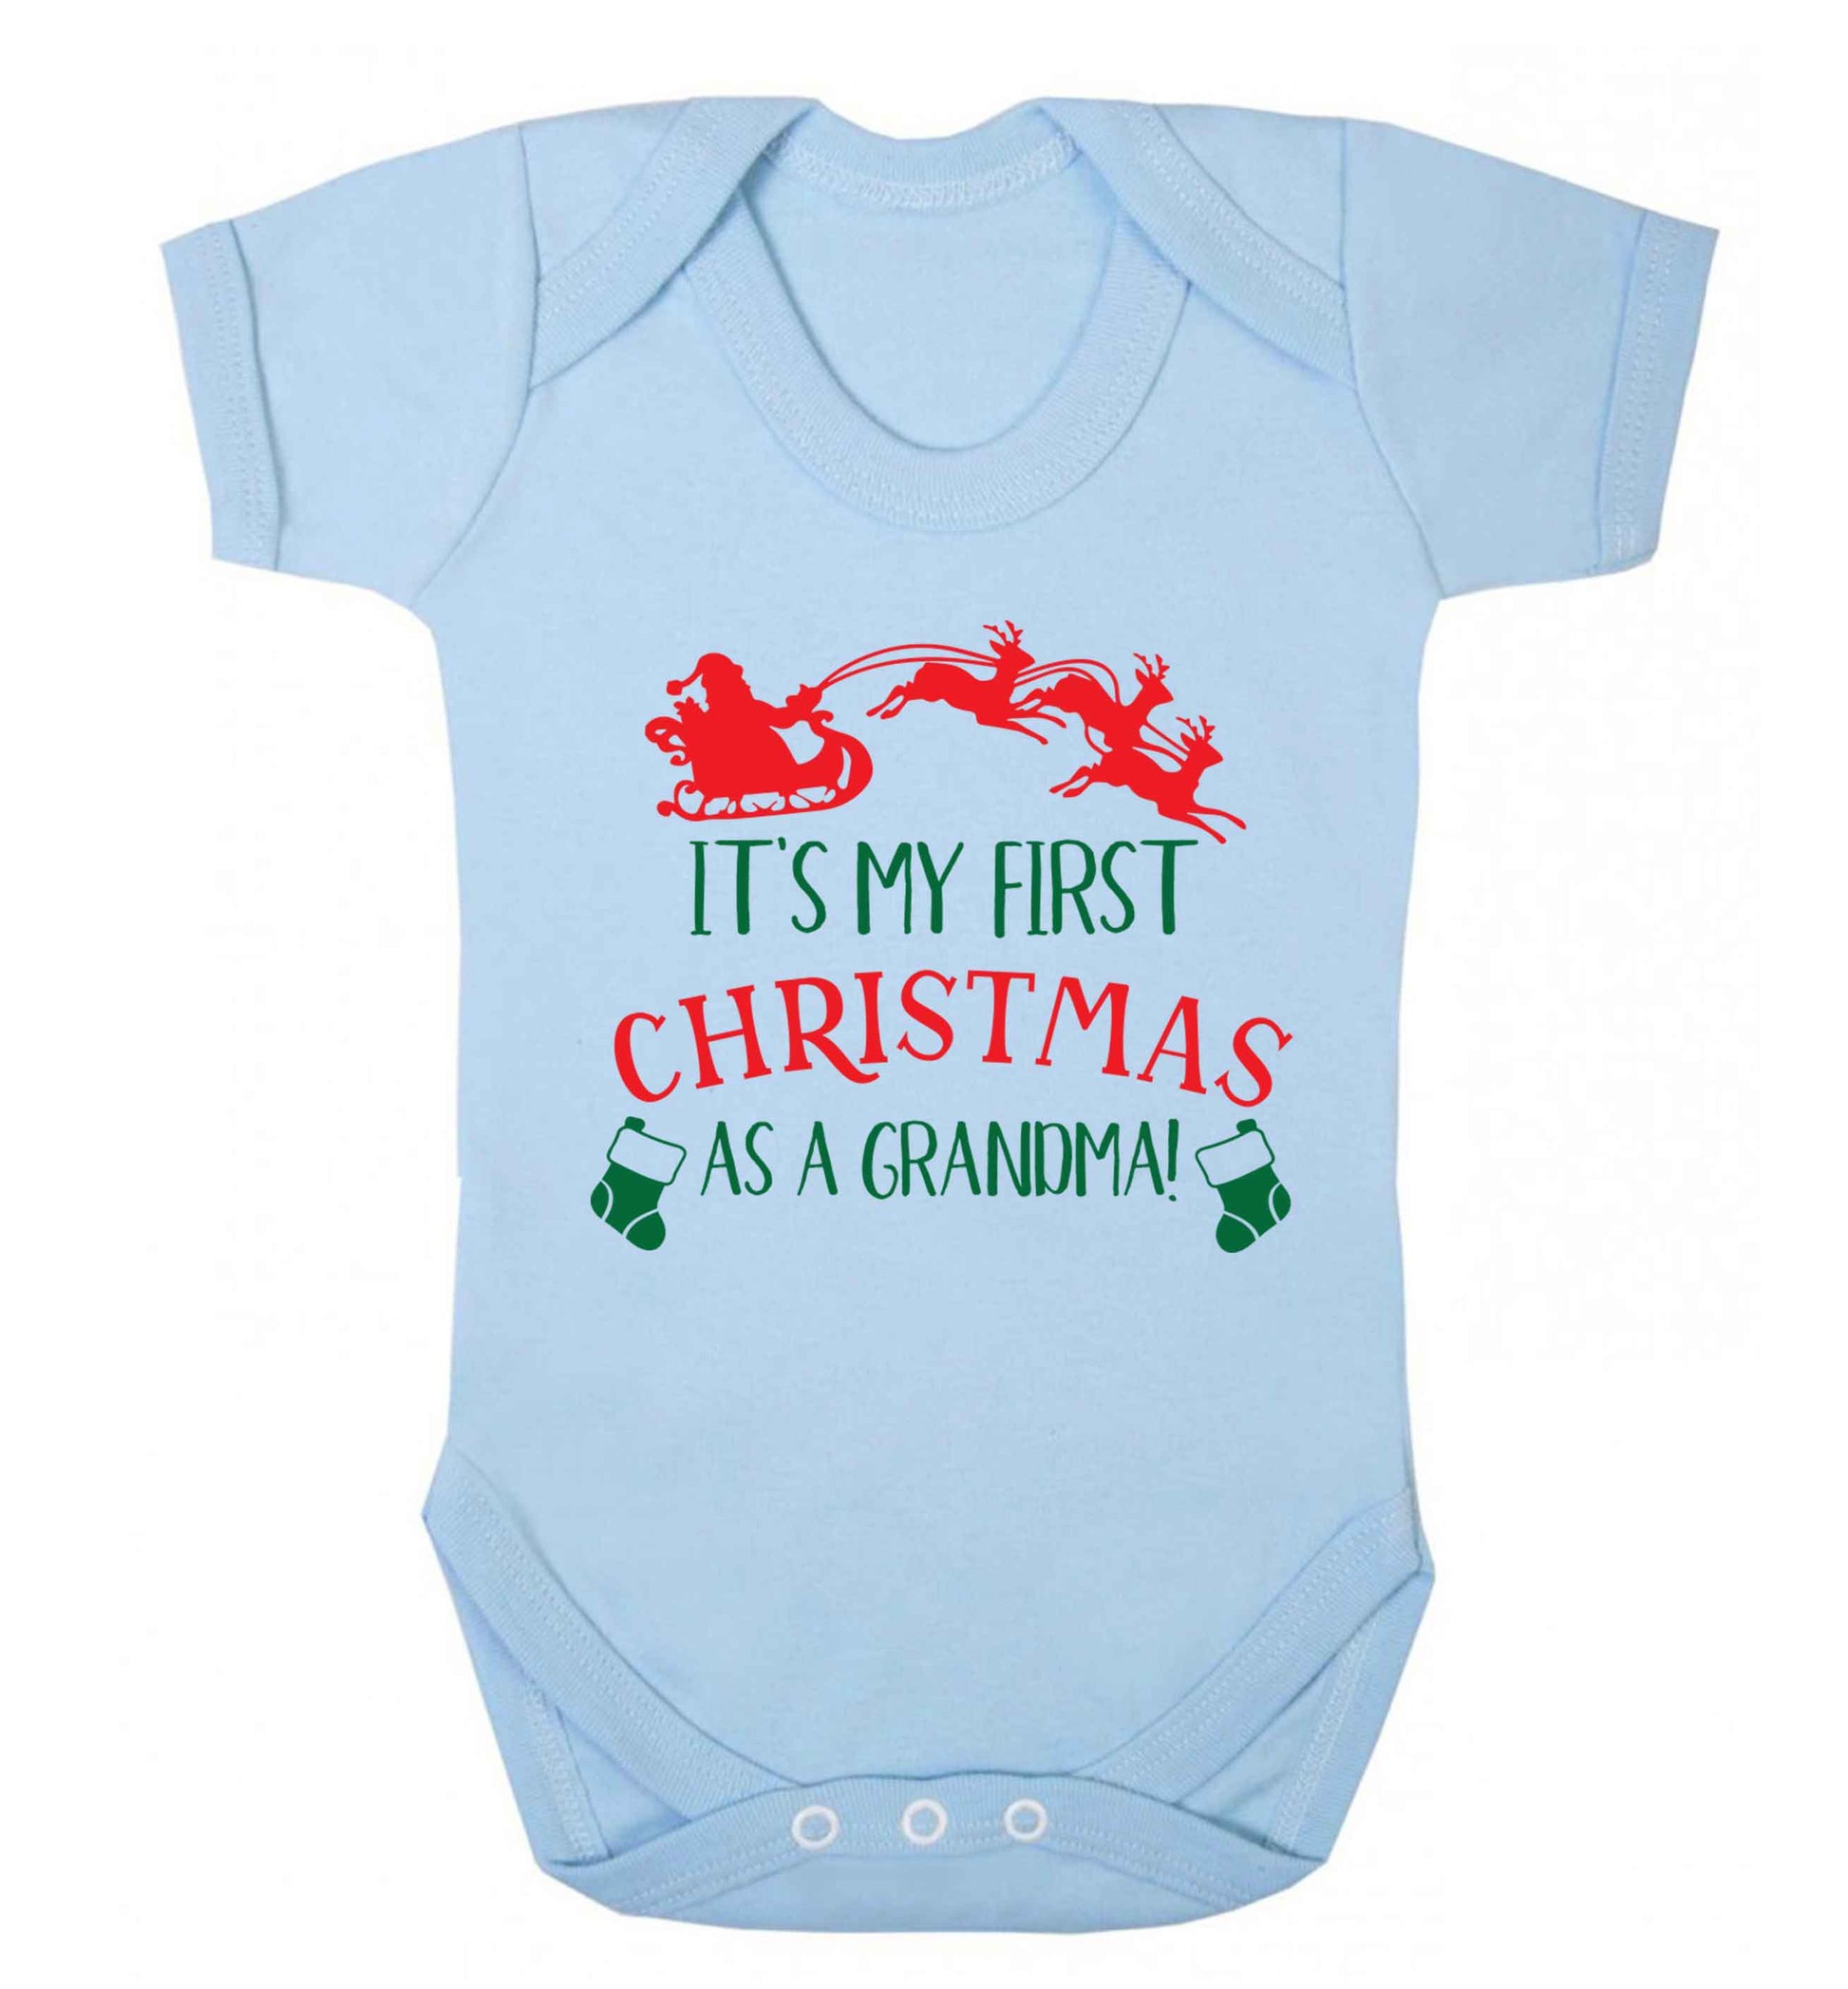 It's my first Christmas as a grandma! Baby Vest pale blue 18-24 months